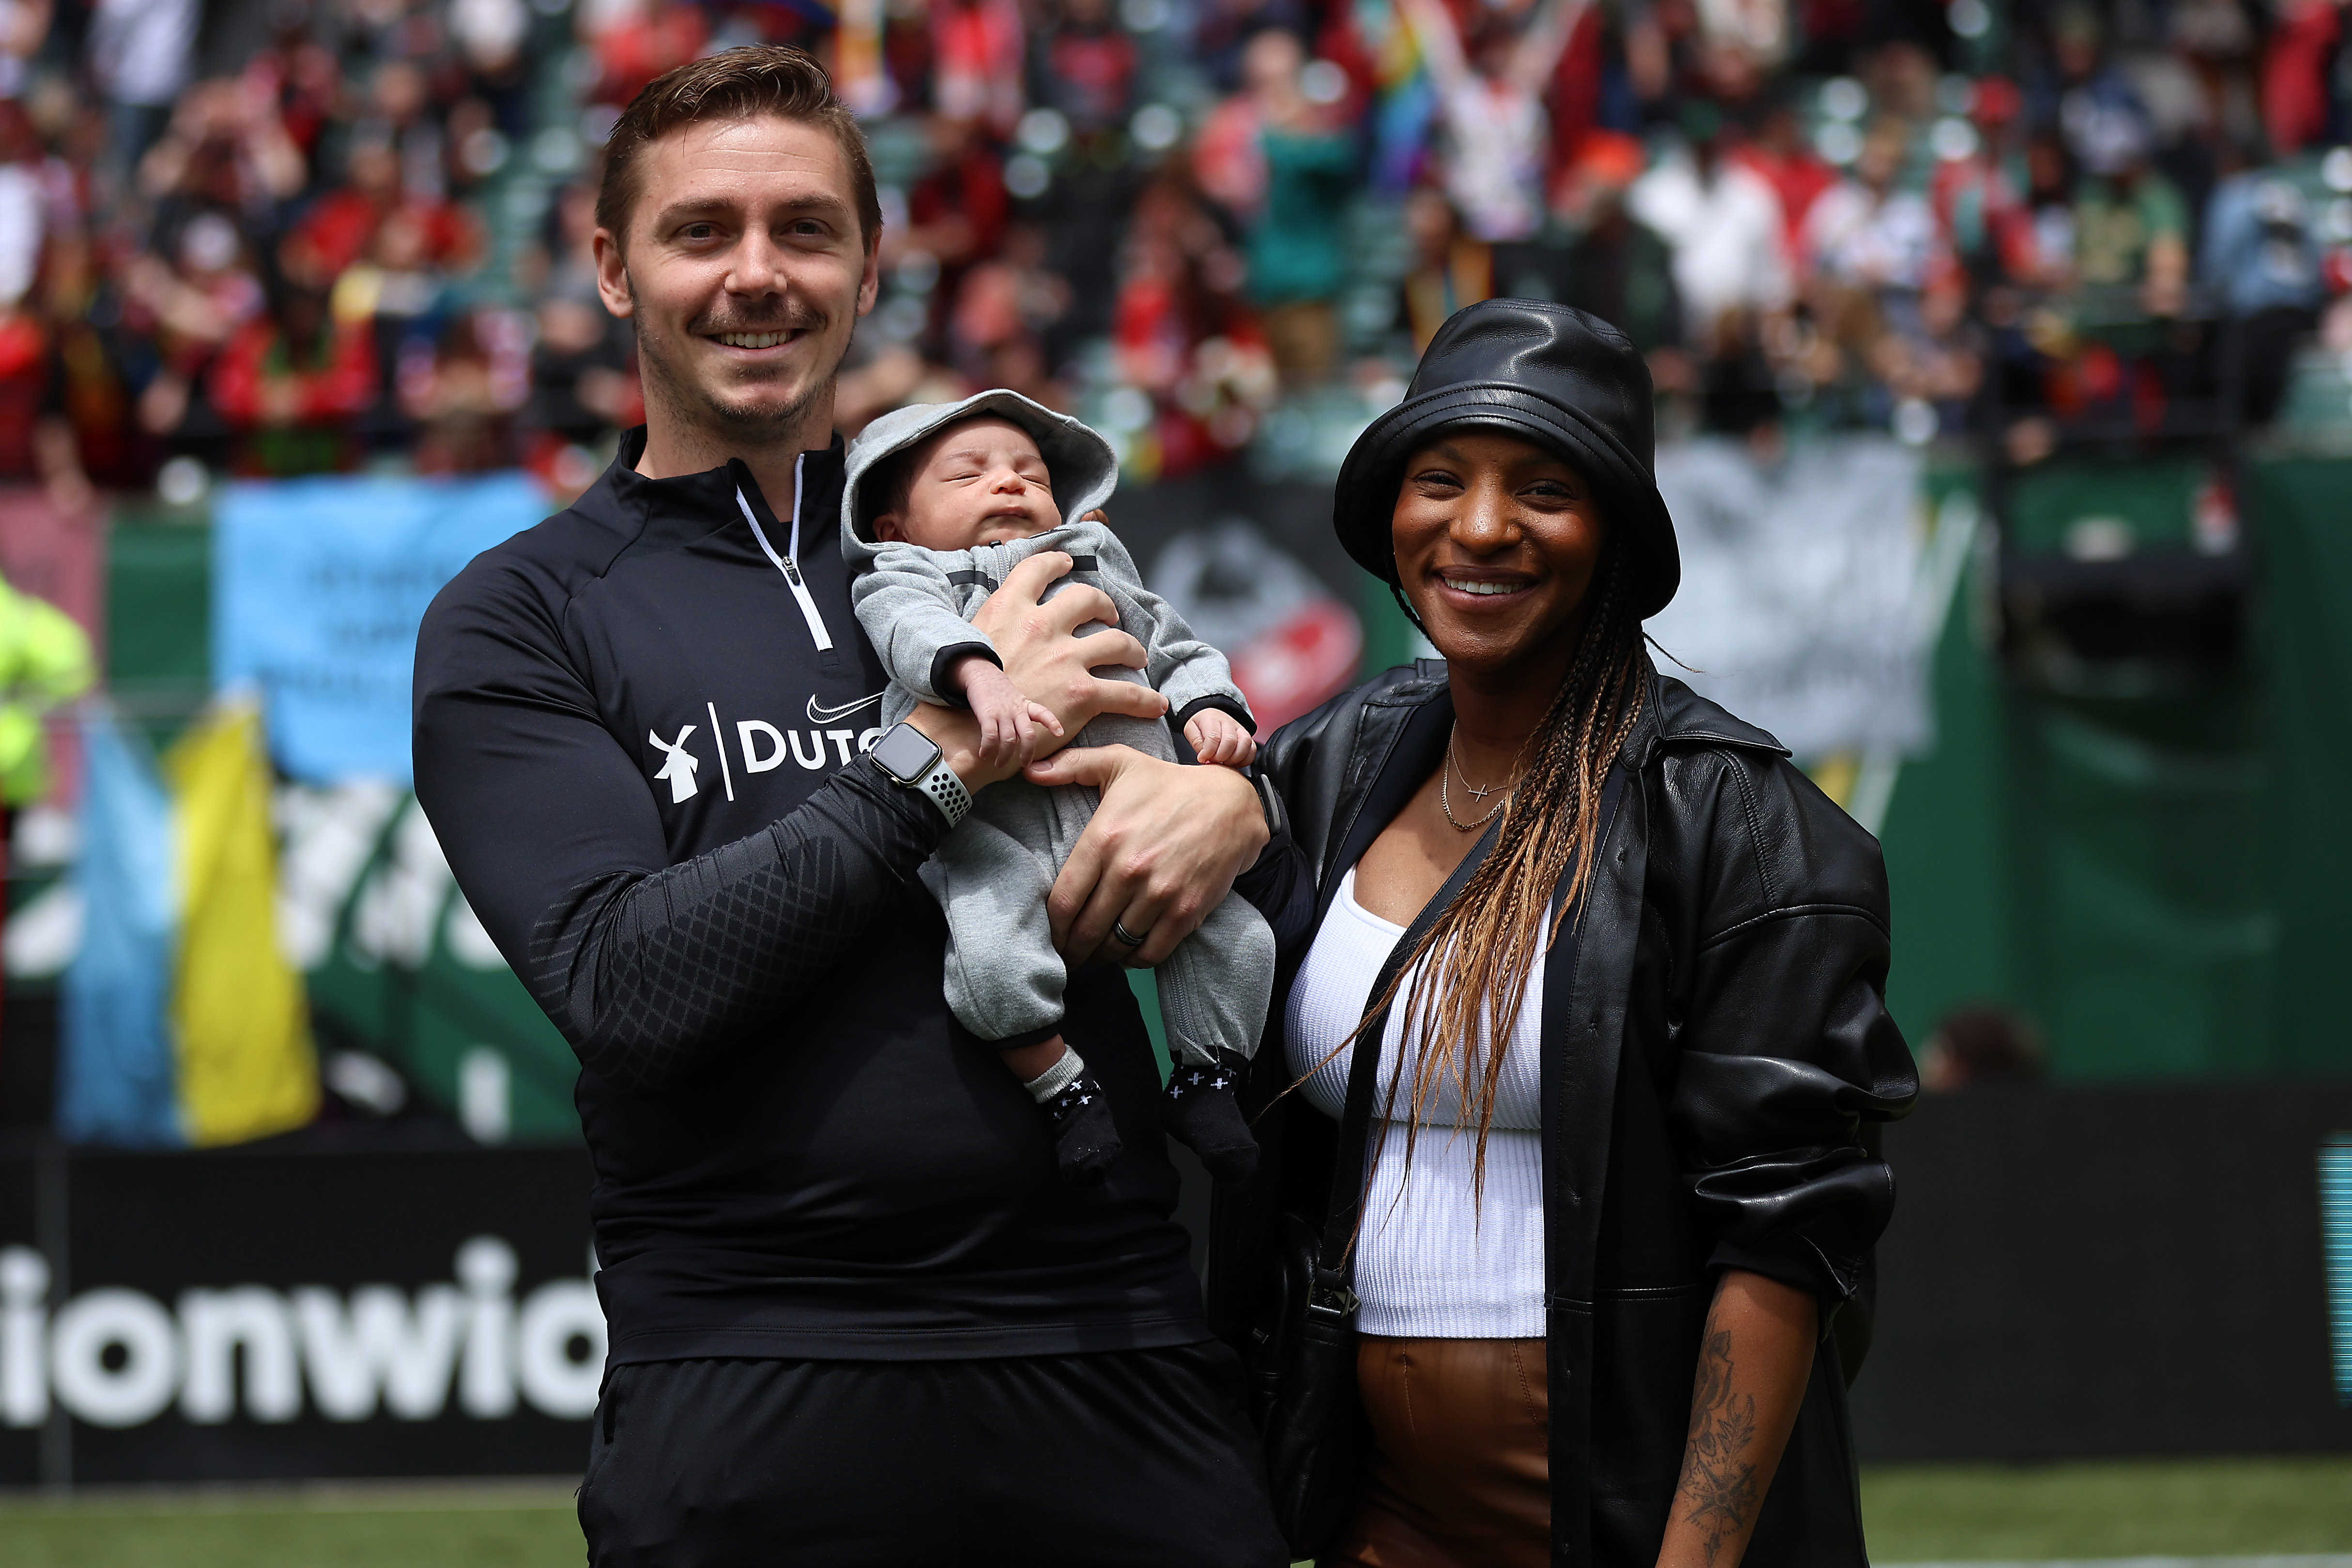 Portland Thorns FC player Crystal Dunn poses for a photo with husband Pierre Soubrier and their son Marcel Jean at Providence Park on June 19, 2022.